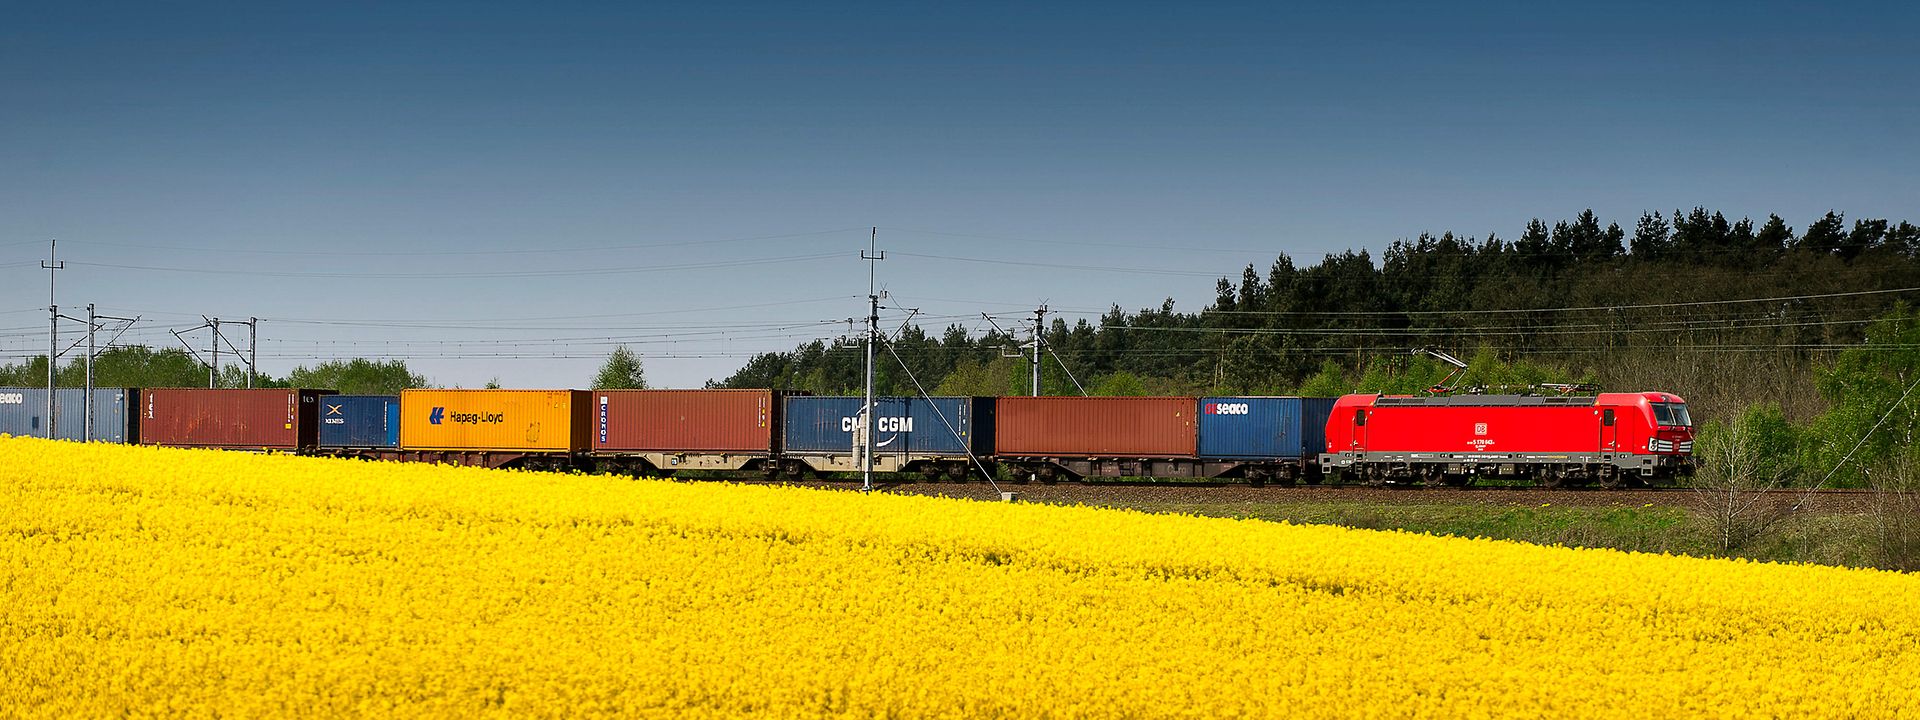 DB Cargo loco with container going through Poland